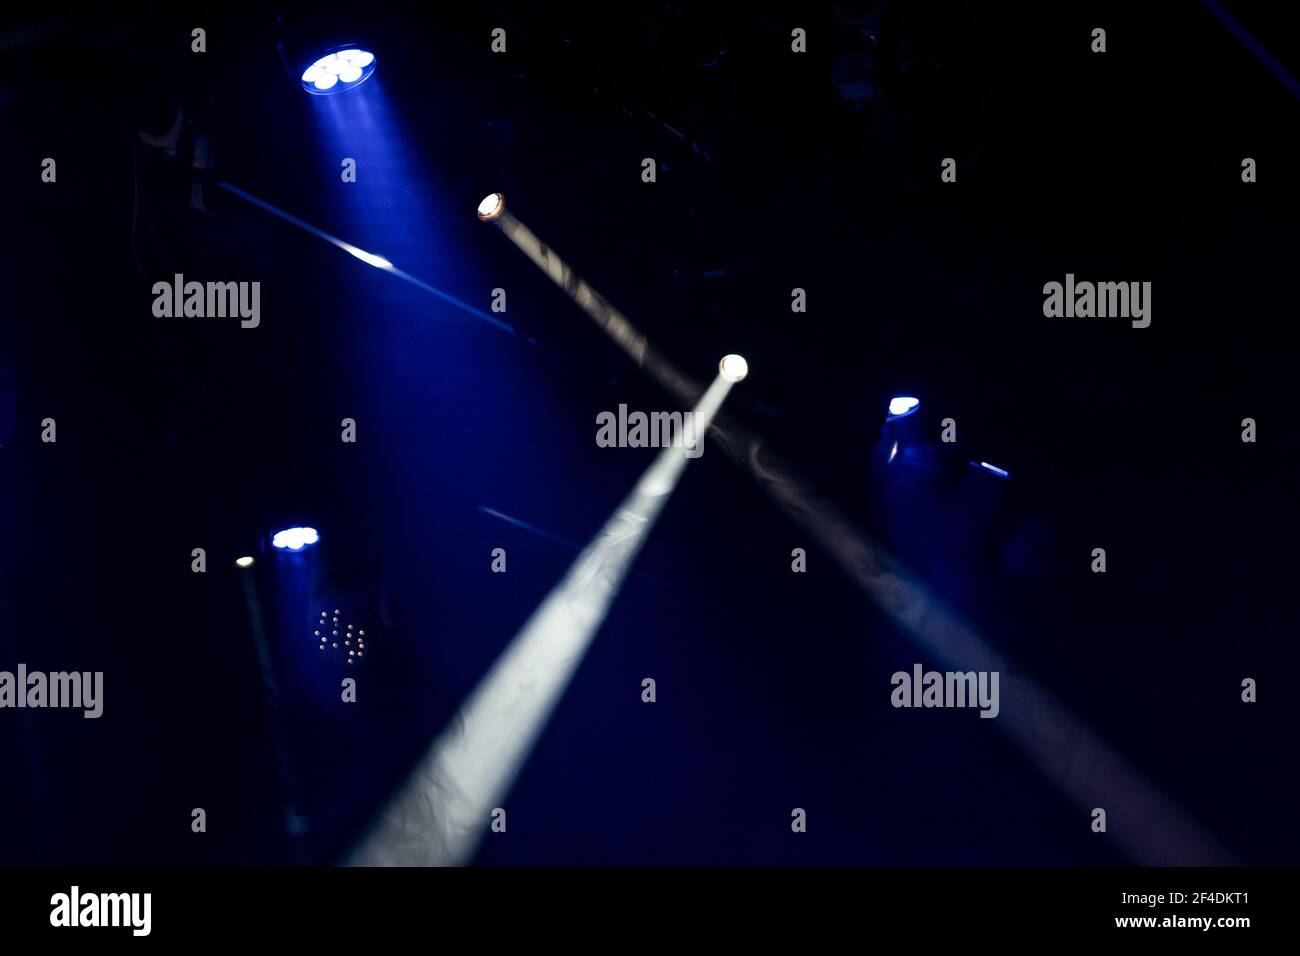 abstraction - dim lighting of the concert stage Stock Photo